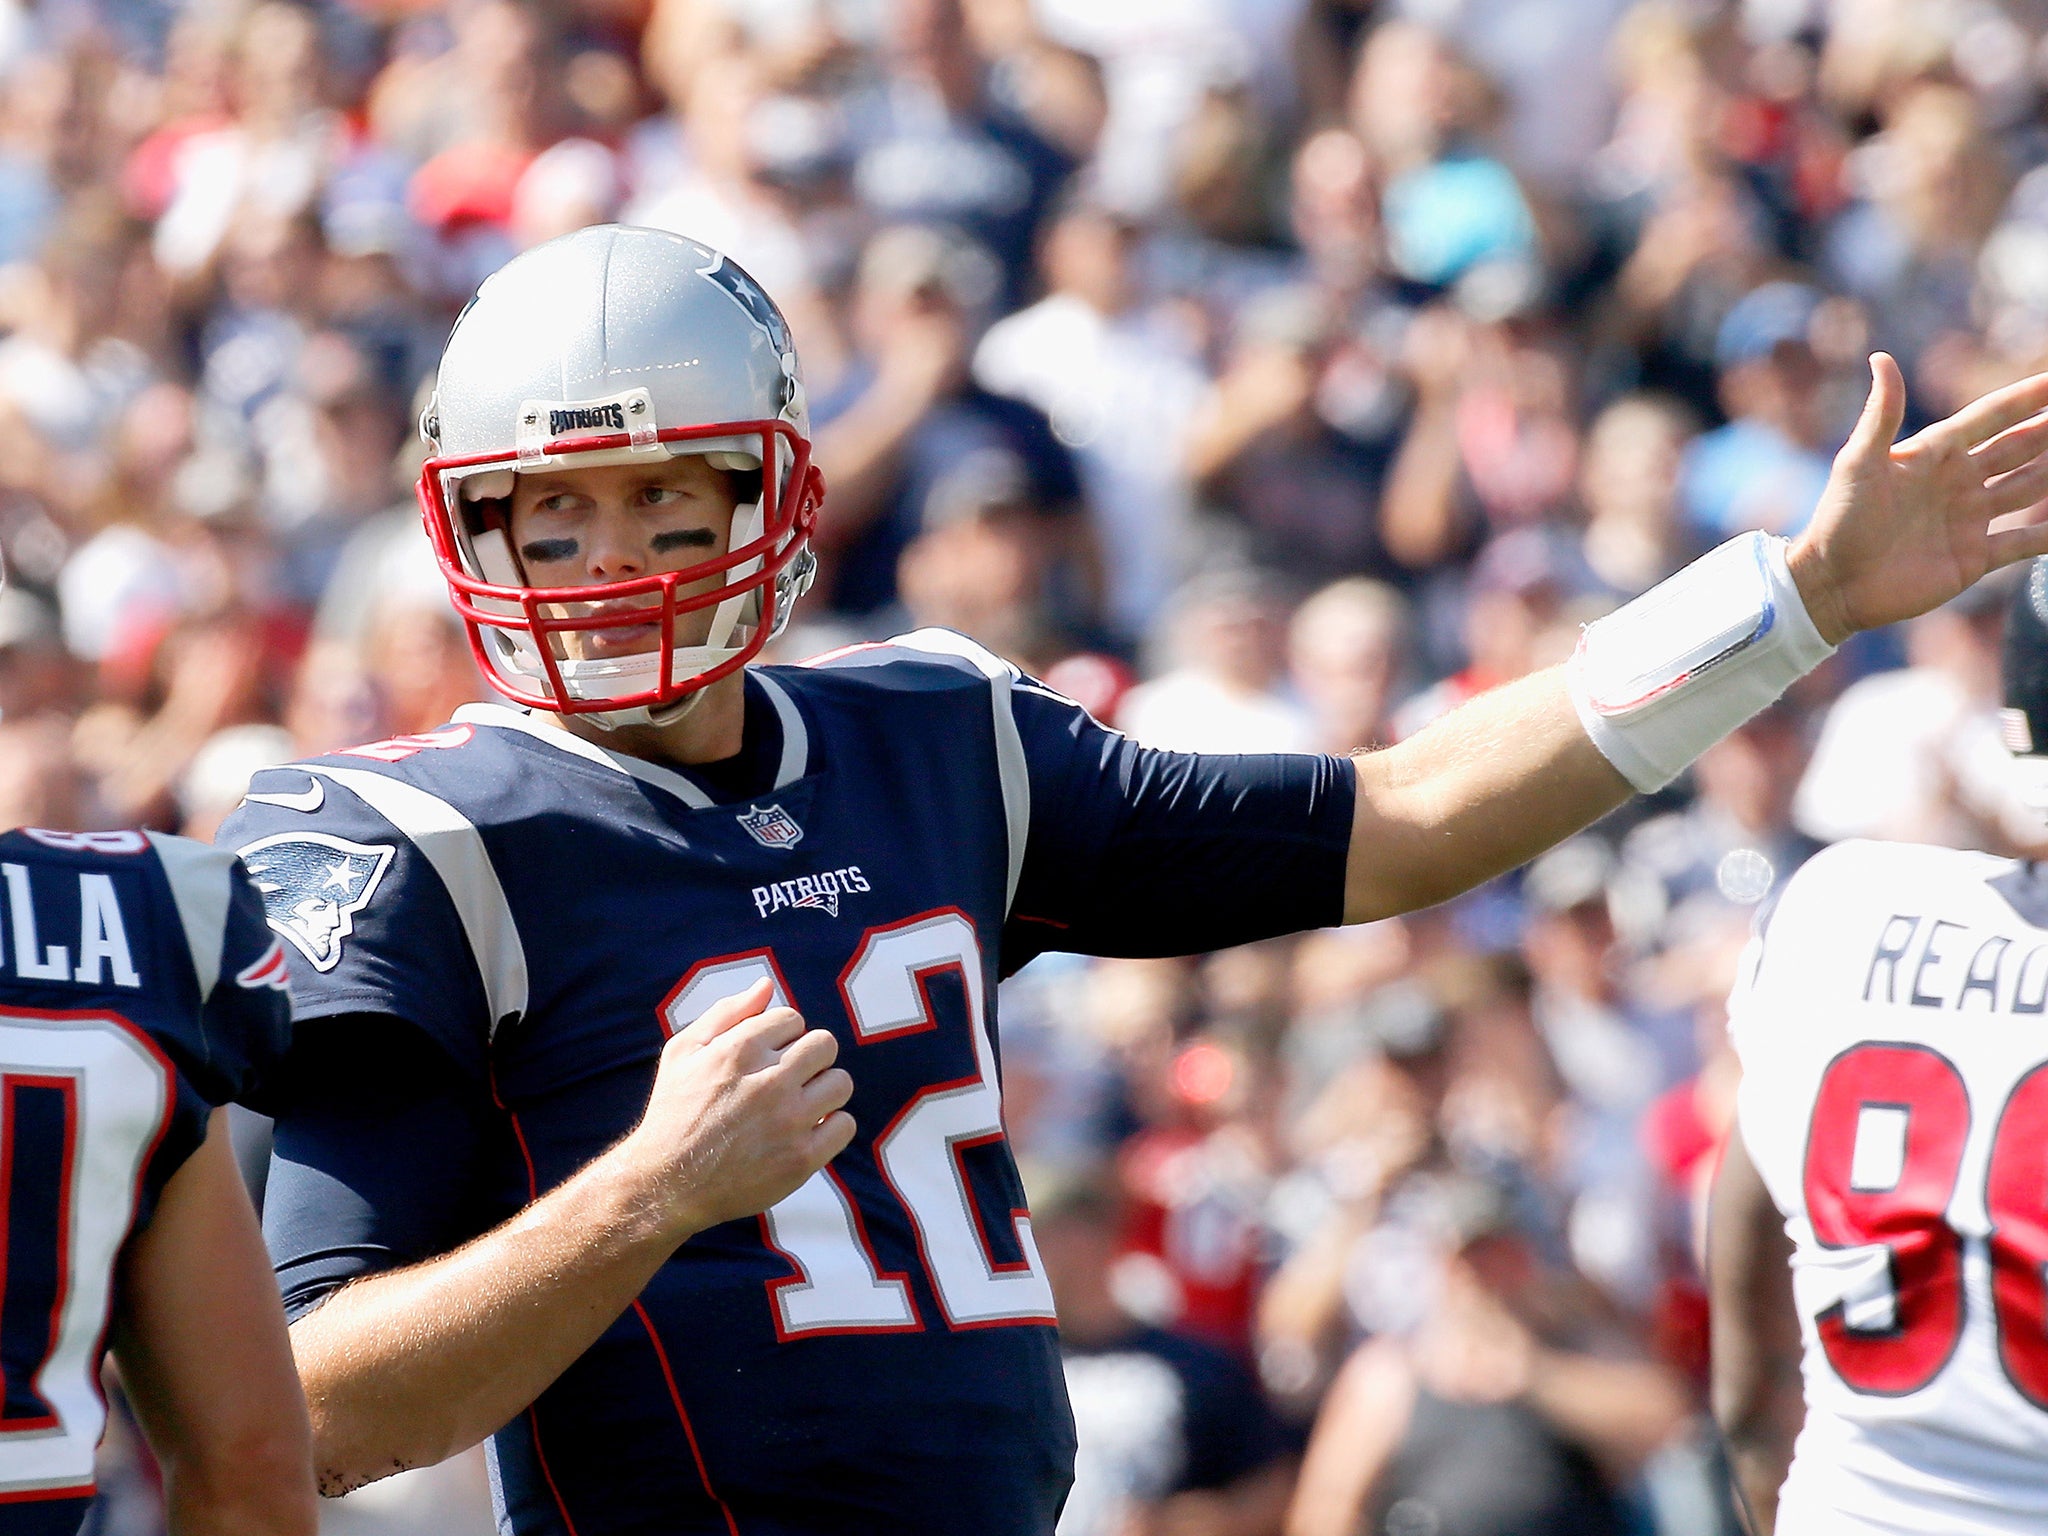 Tom Brady secured victory for the New England Patriots against the Houston Texans